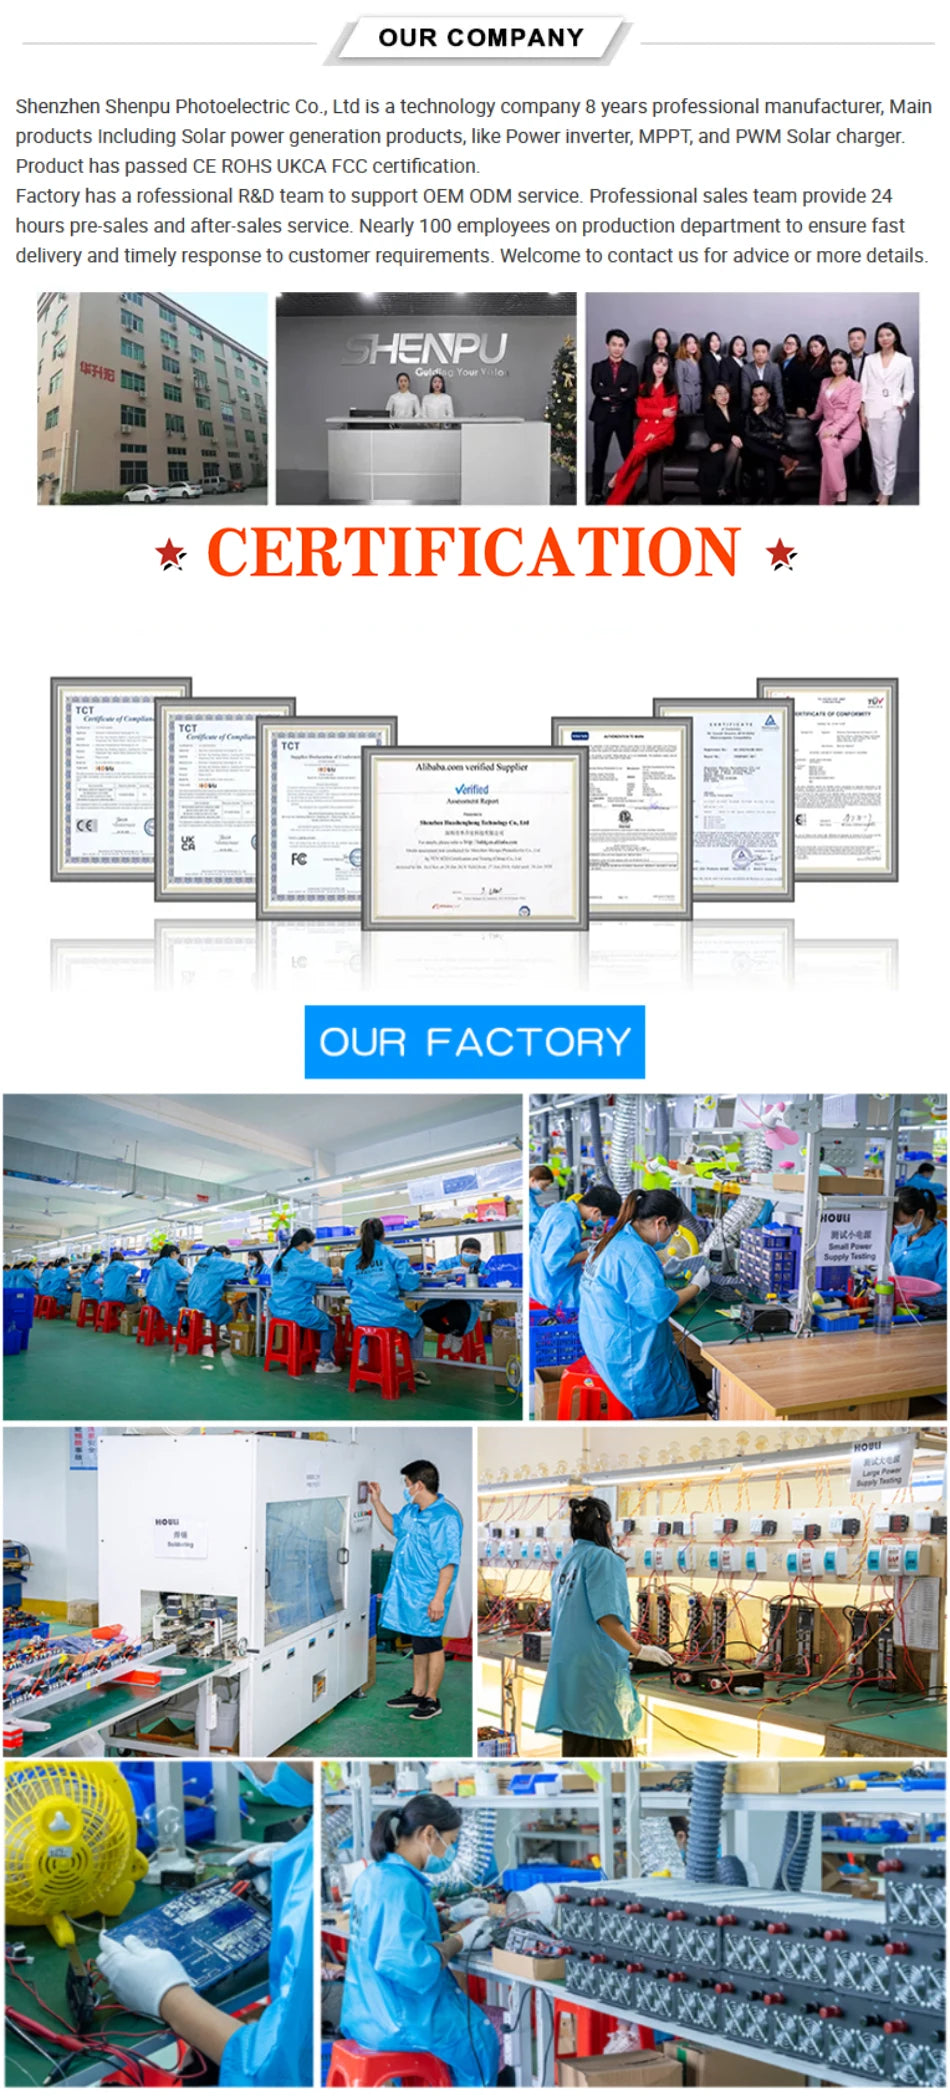 Inverter, Shenzhen Shenpu Photoelectric Co., Ltd: Solar power products, CE/RoHS certified, OEM/ODM services with dedicated R&D team.